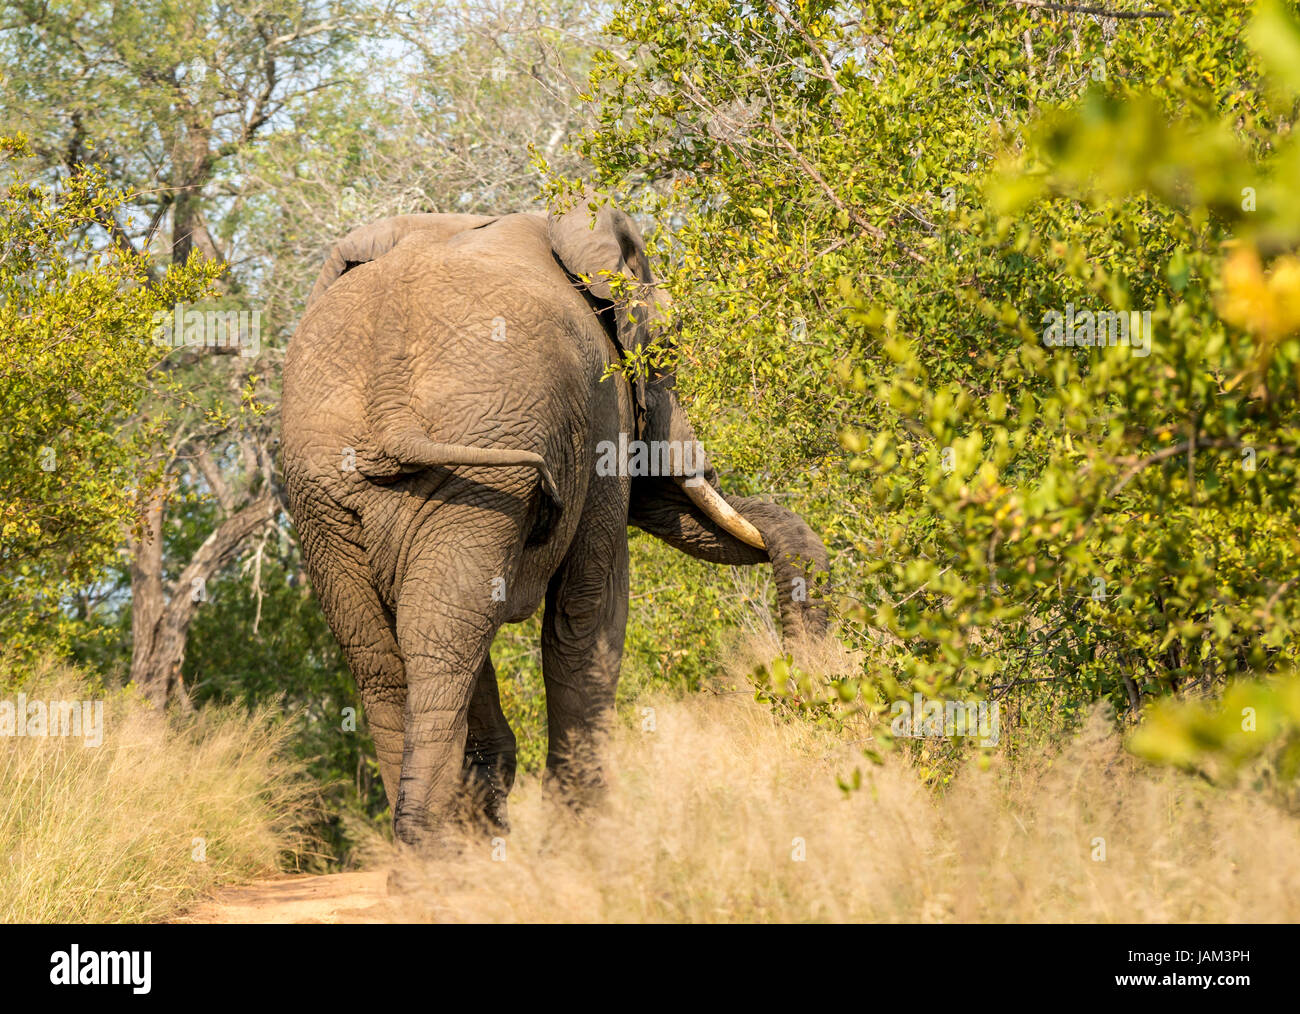 African bull elephant in must, indicated by trunk coiled around tusk, Greater Kruger National Park, South Africa Stock Photo